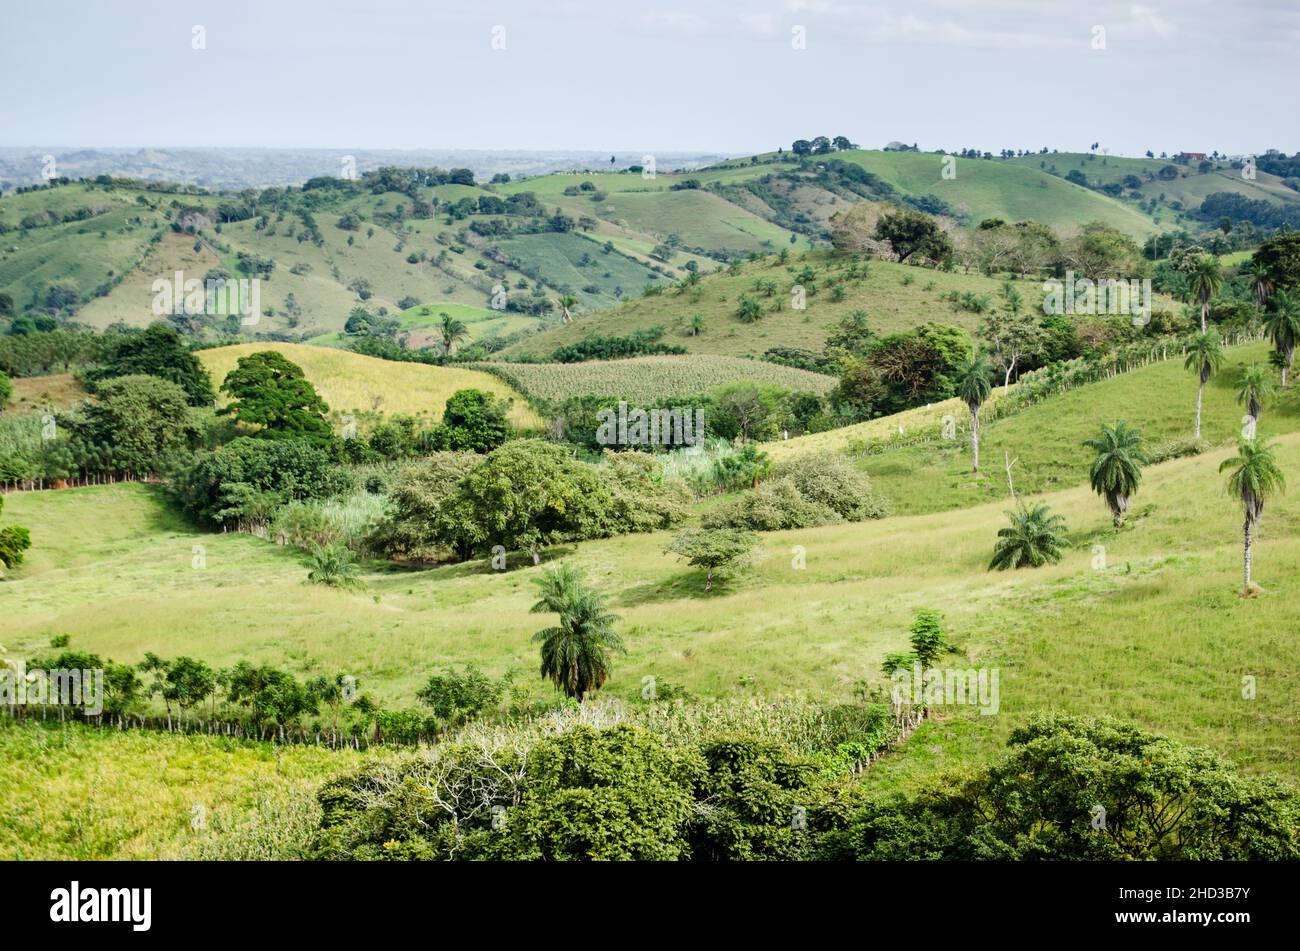 Pastures and agricultural land typical of the dry region of Panama, known as 'Arco Seco' Stock Photo